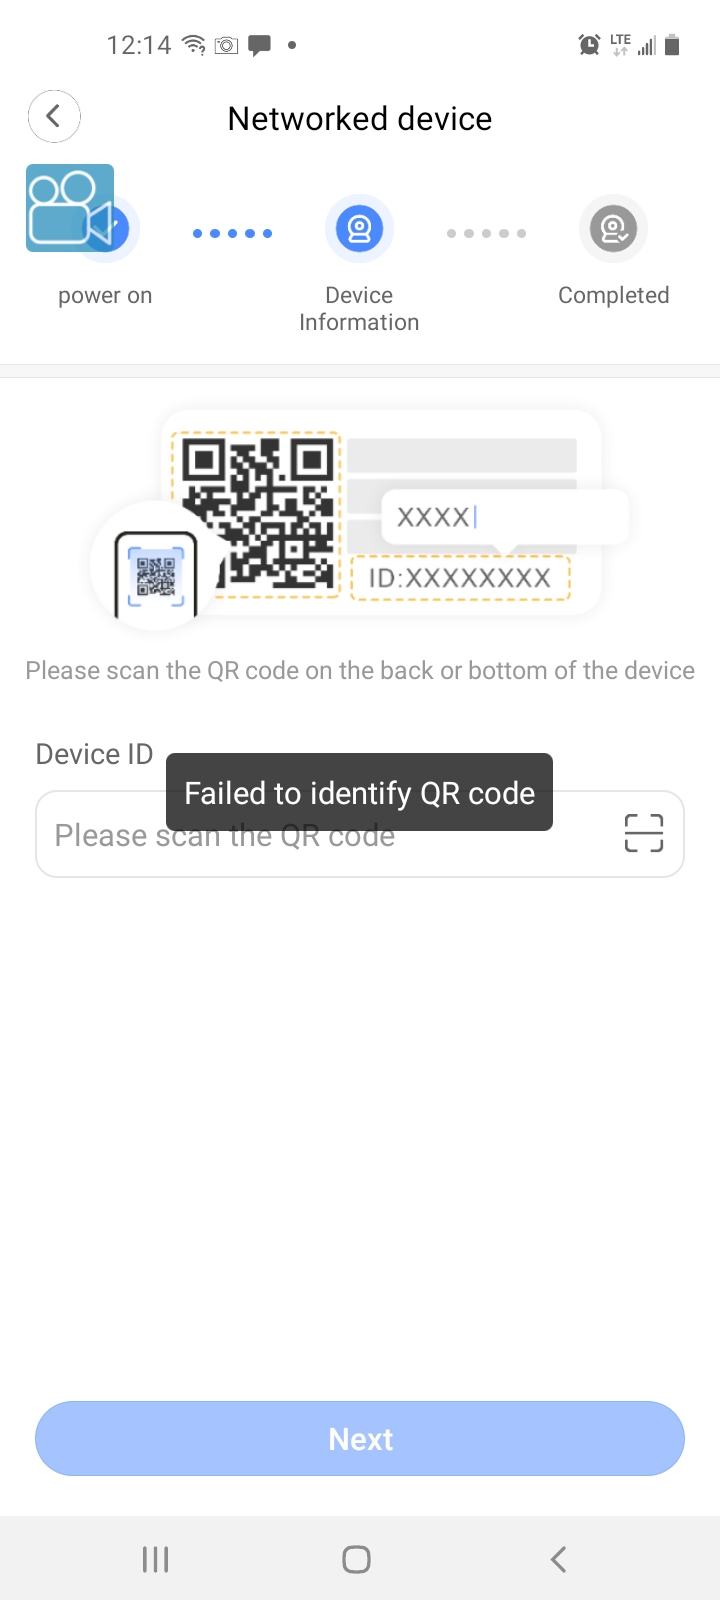 The QR sticker won't scan from the QR on the box